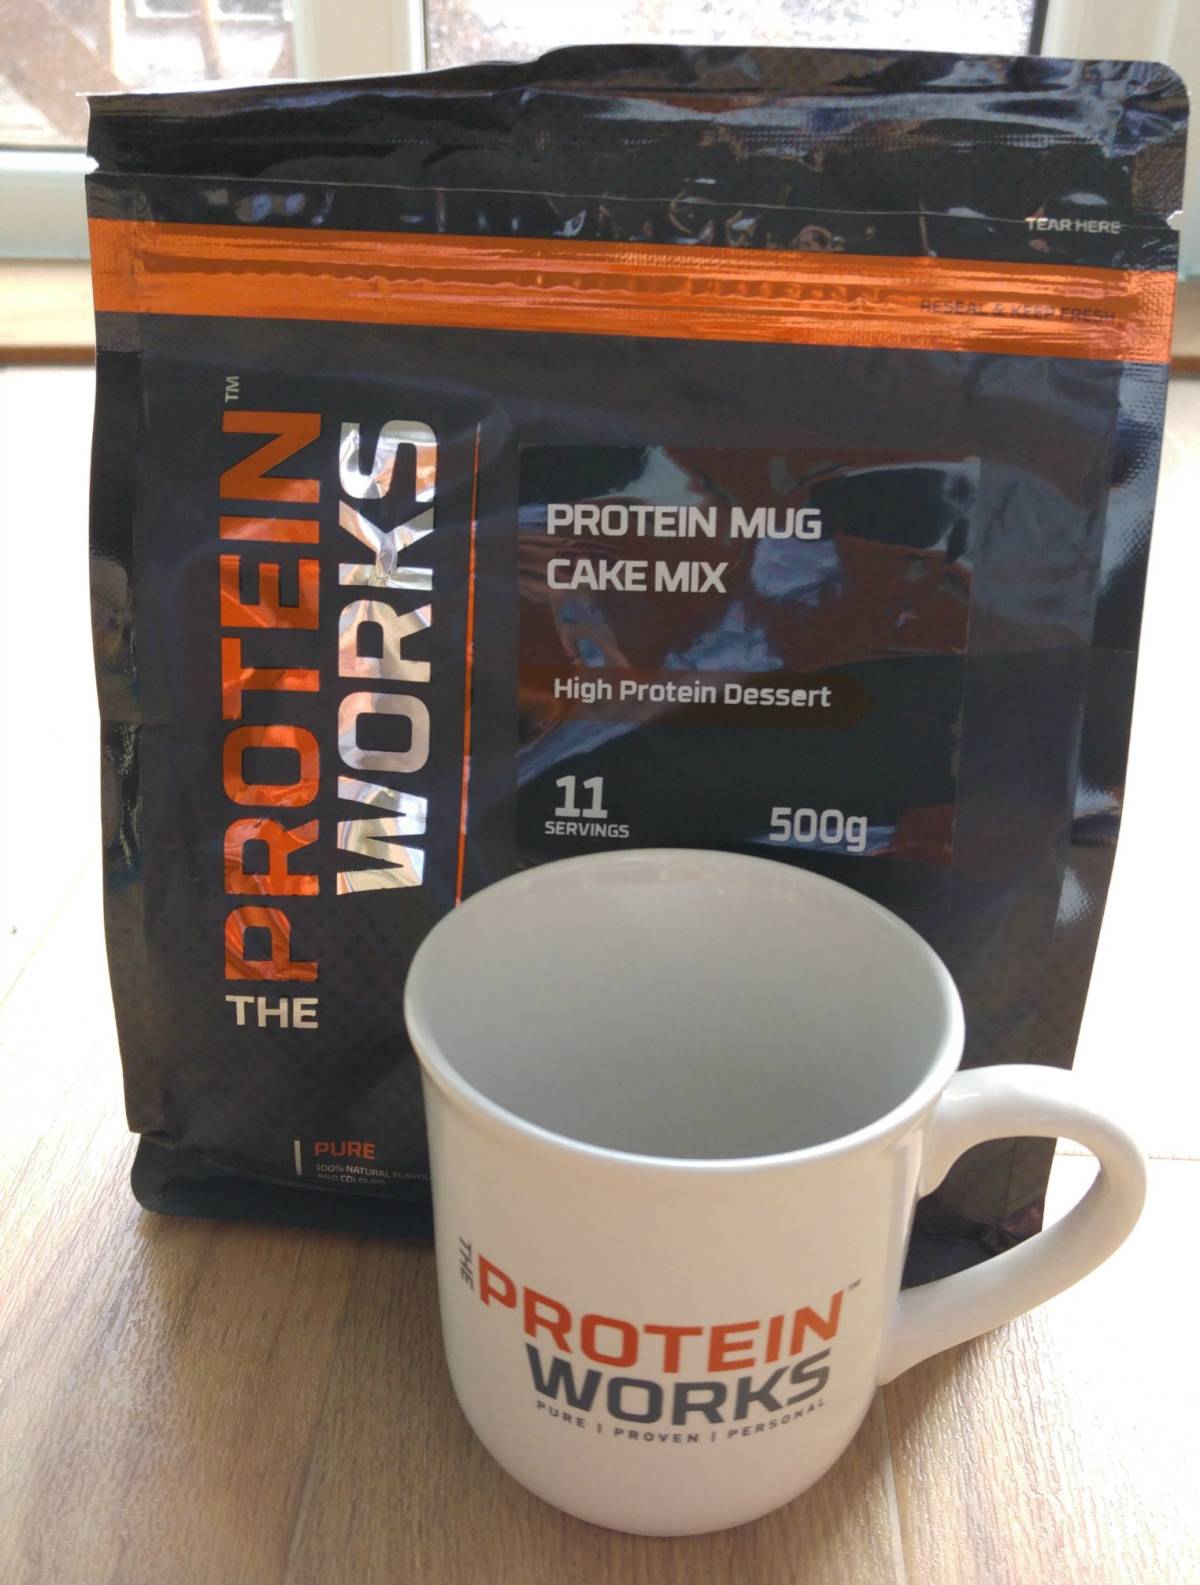 Protein Mug Cakes with The Protein Works